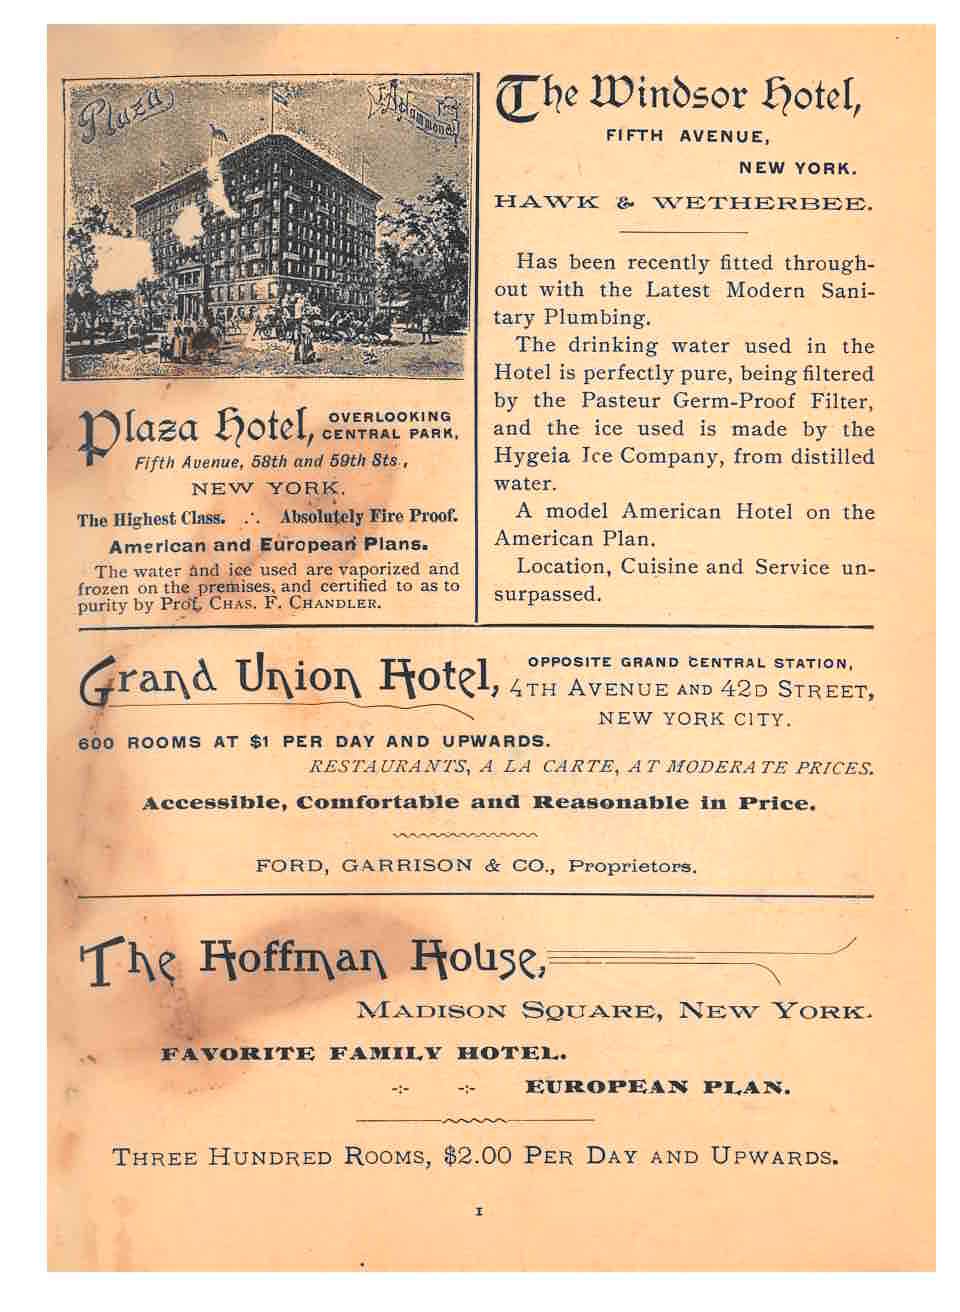 hotel advertisements for four hotels in New York City including a picture of the Plaza Hotel